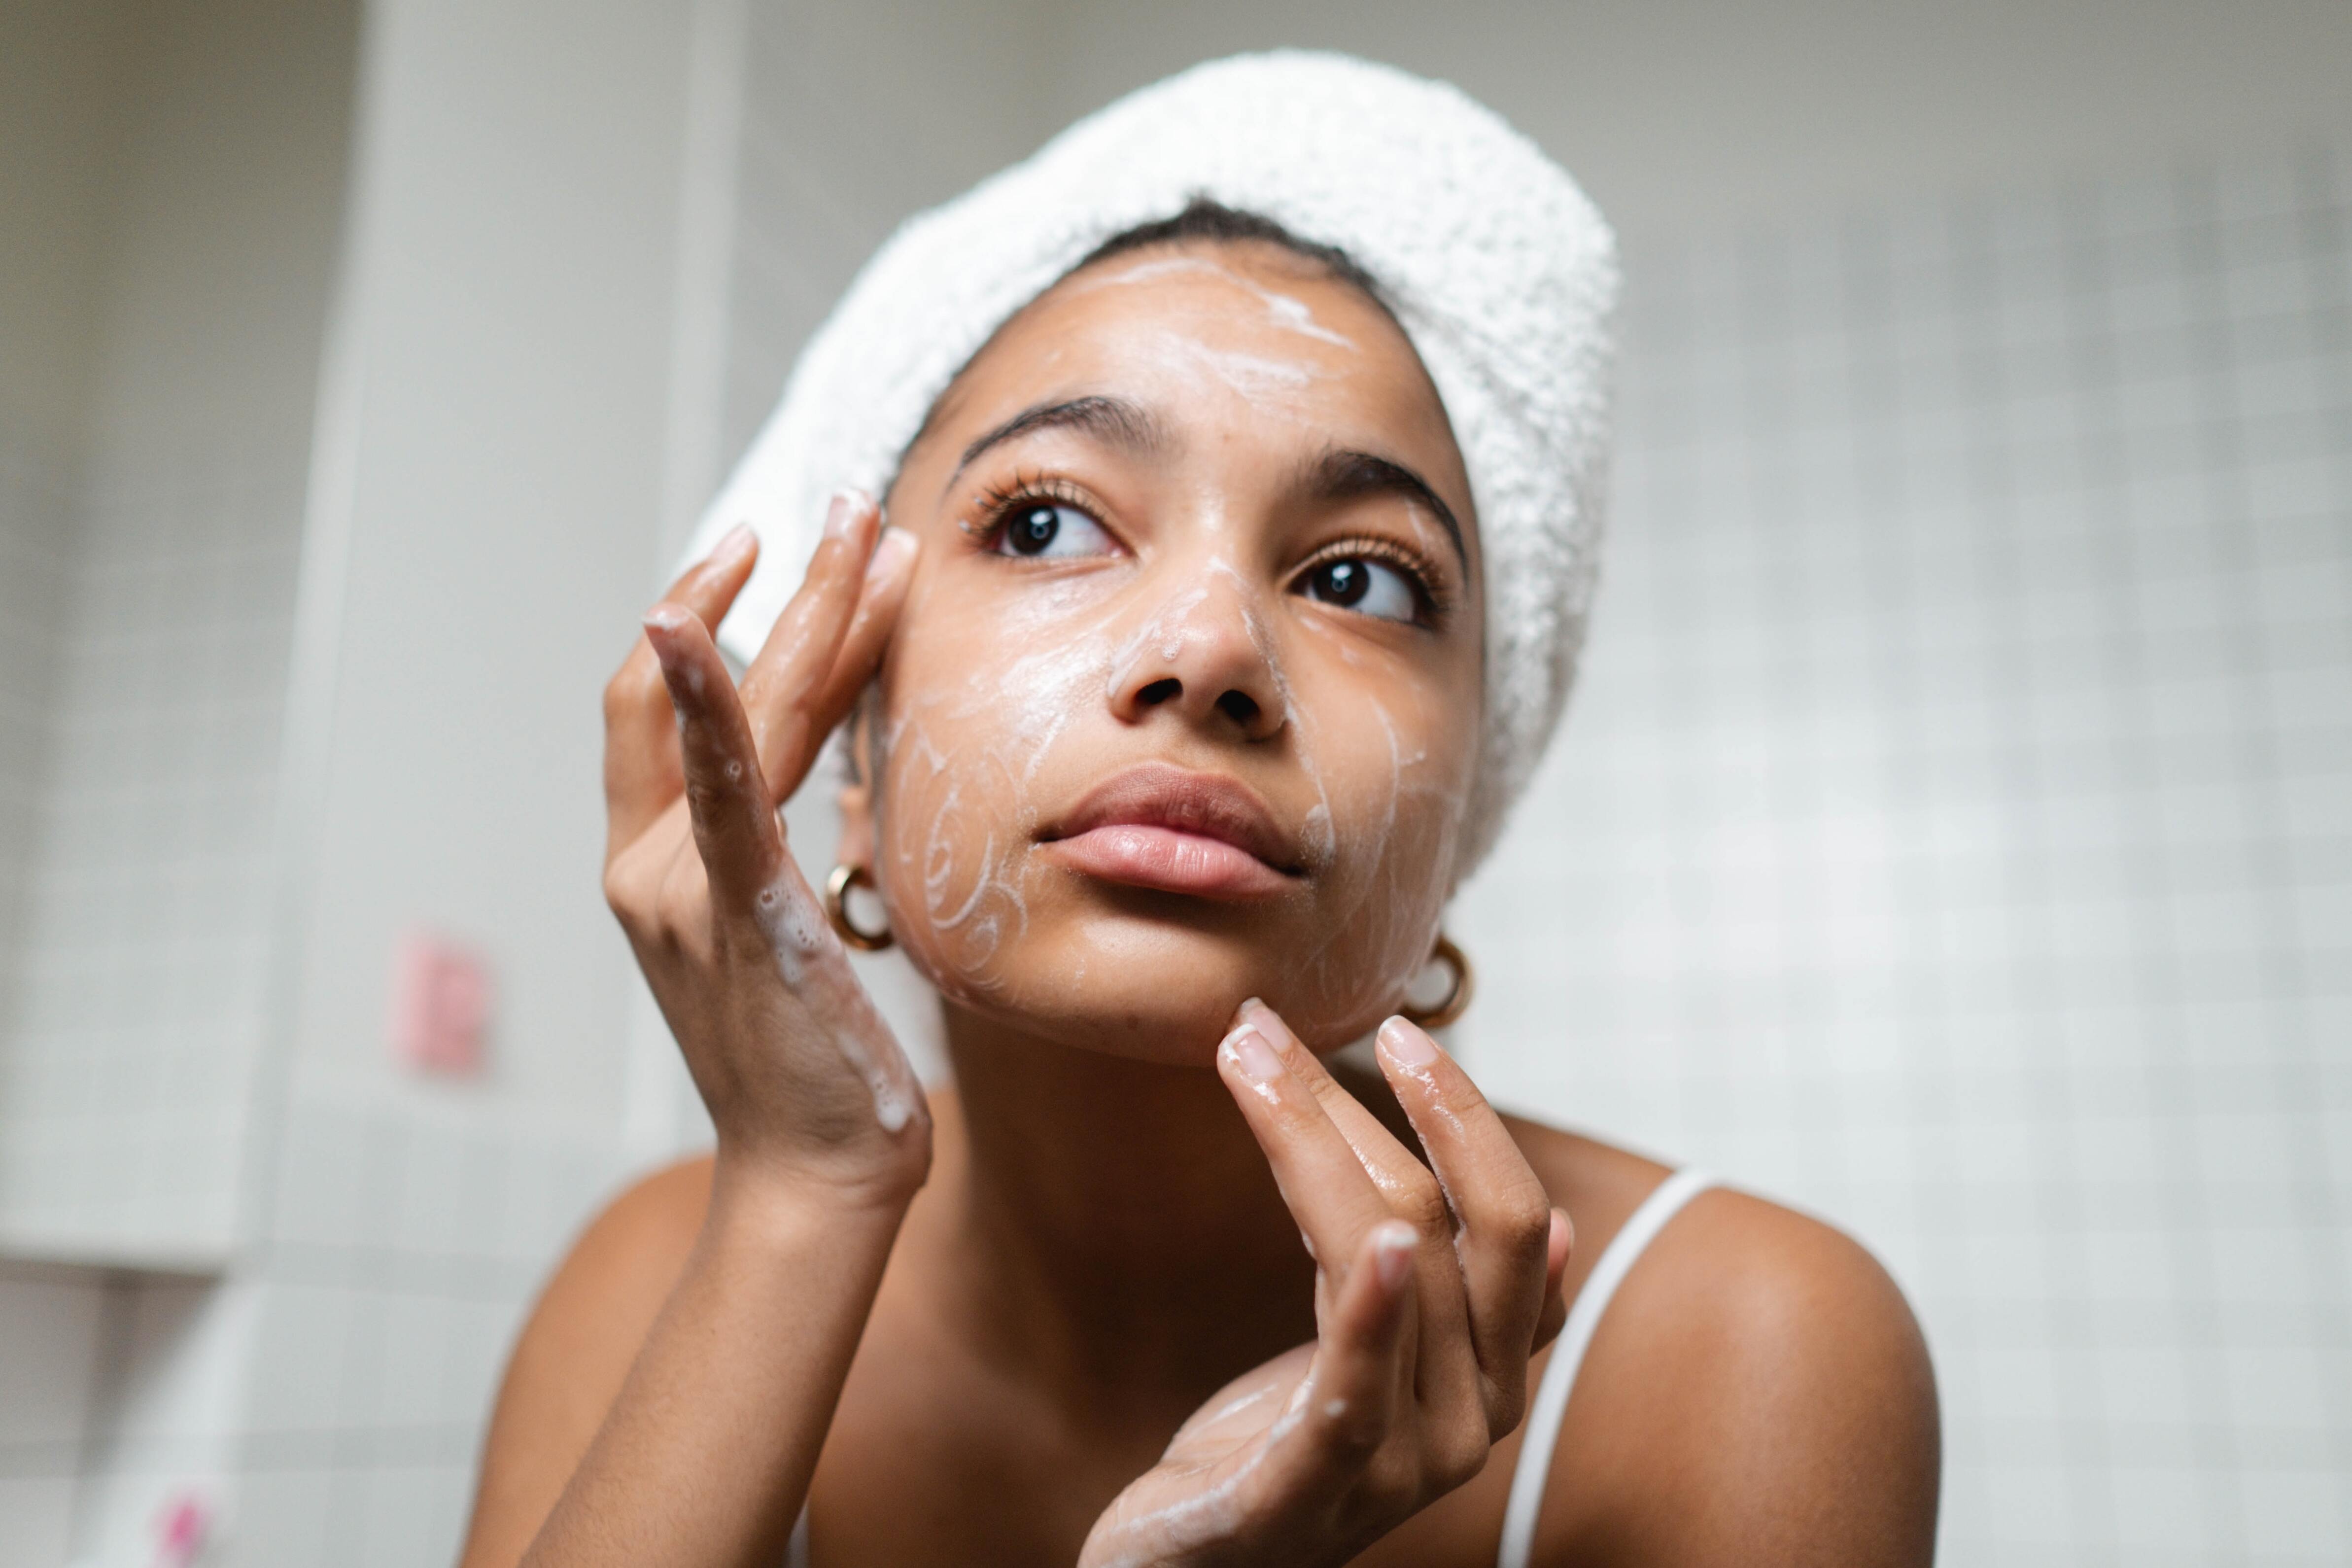 How to get rid of hormonal acne